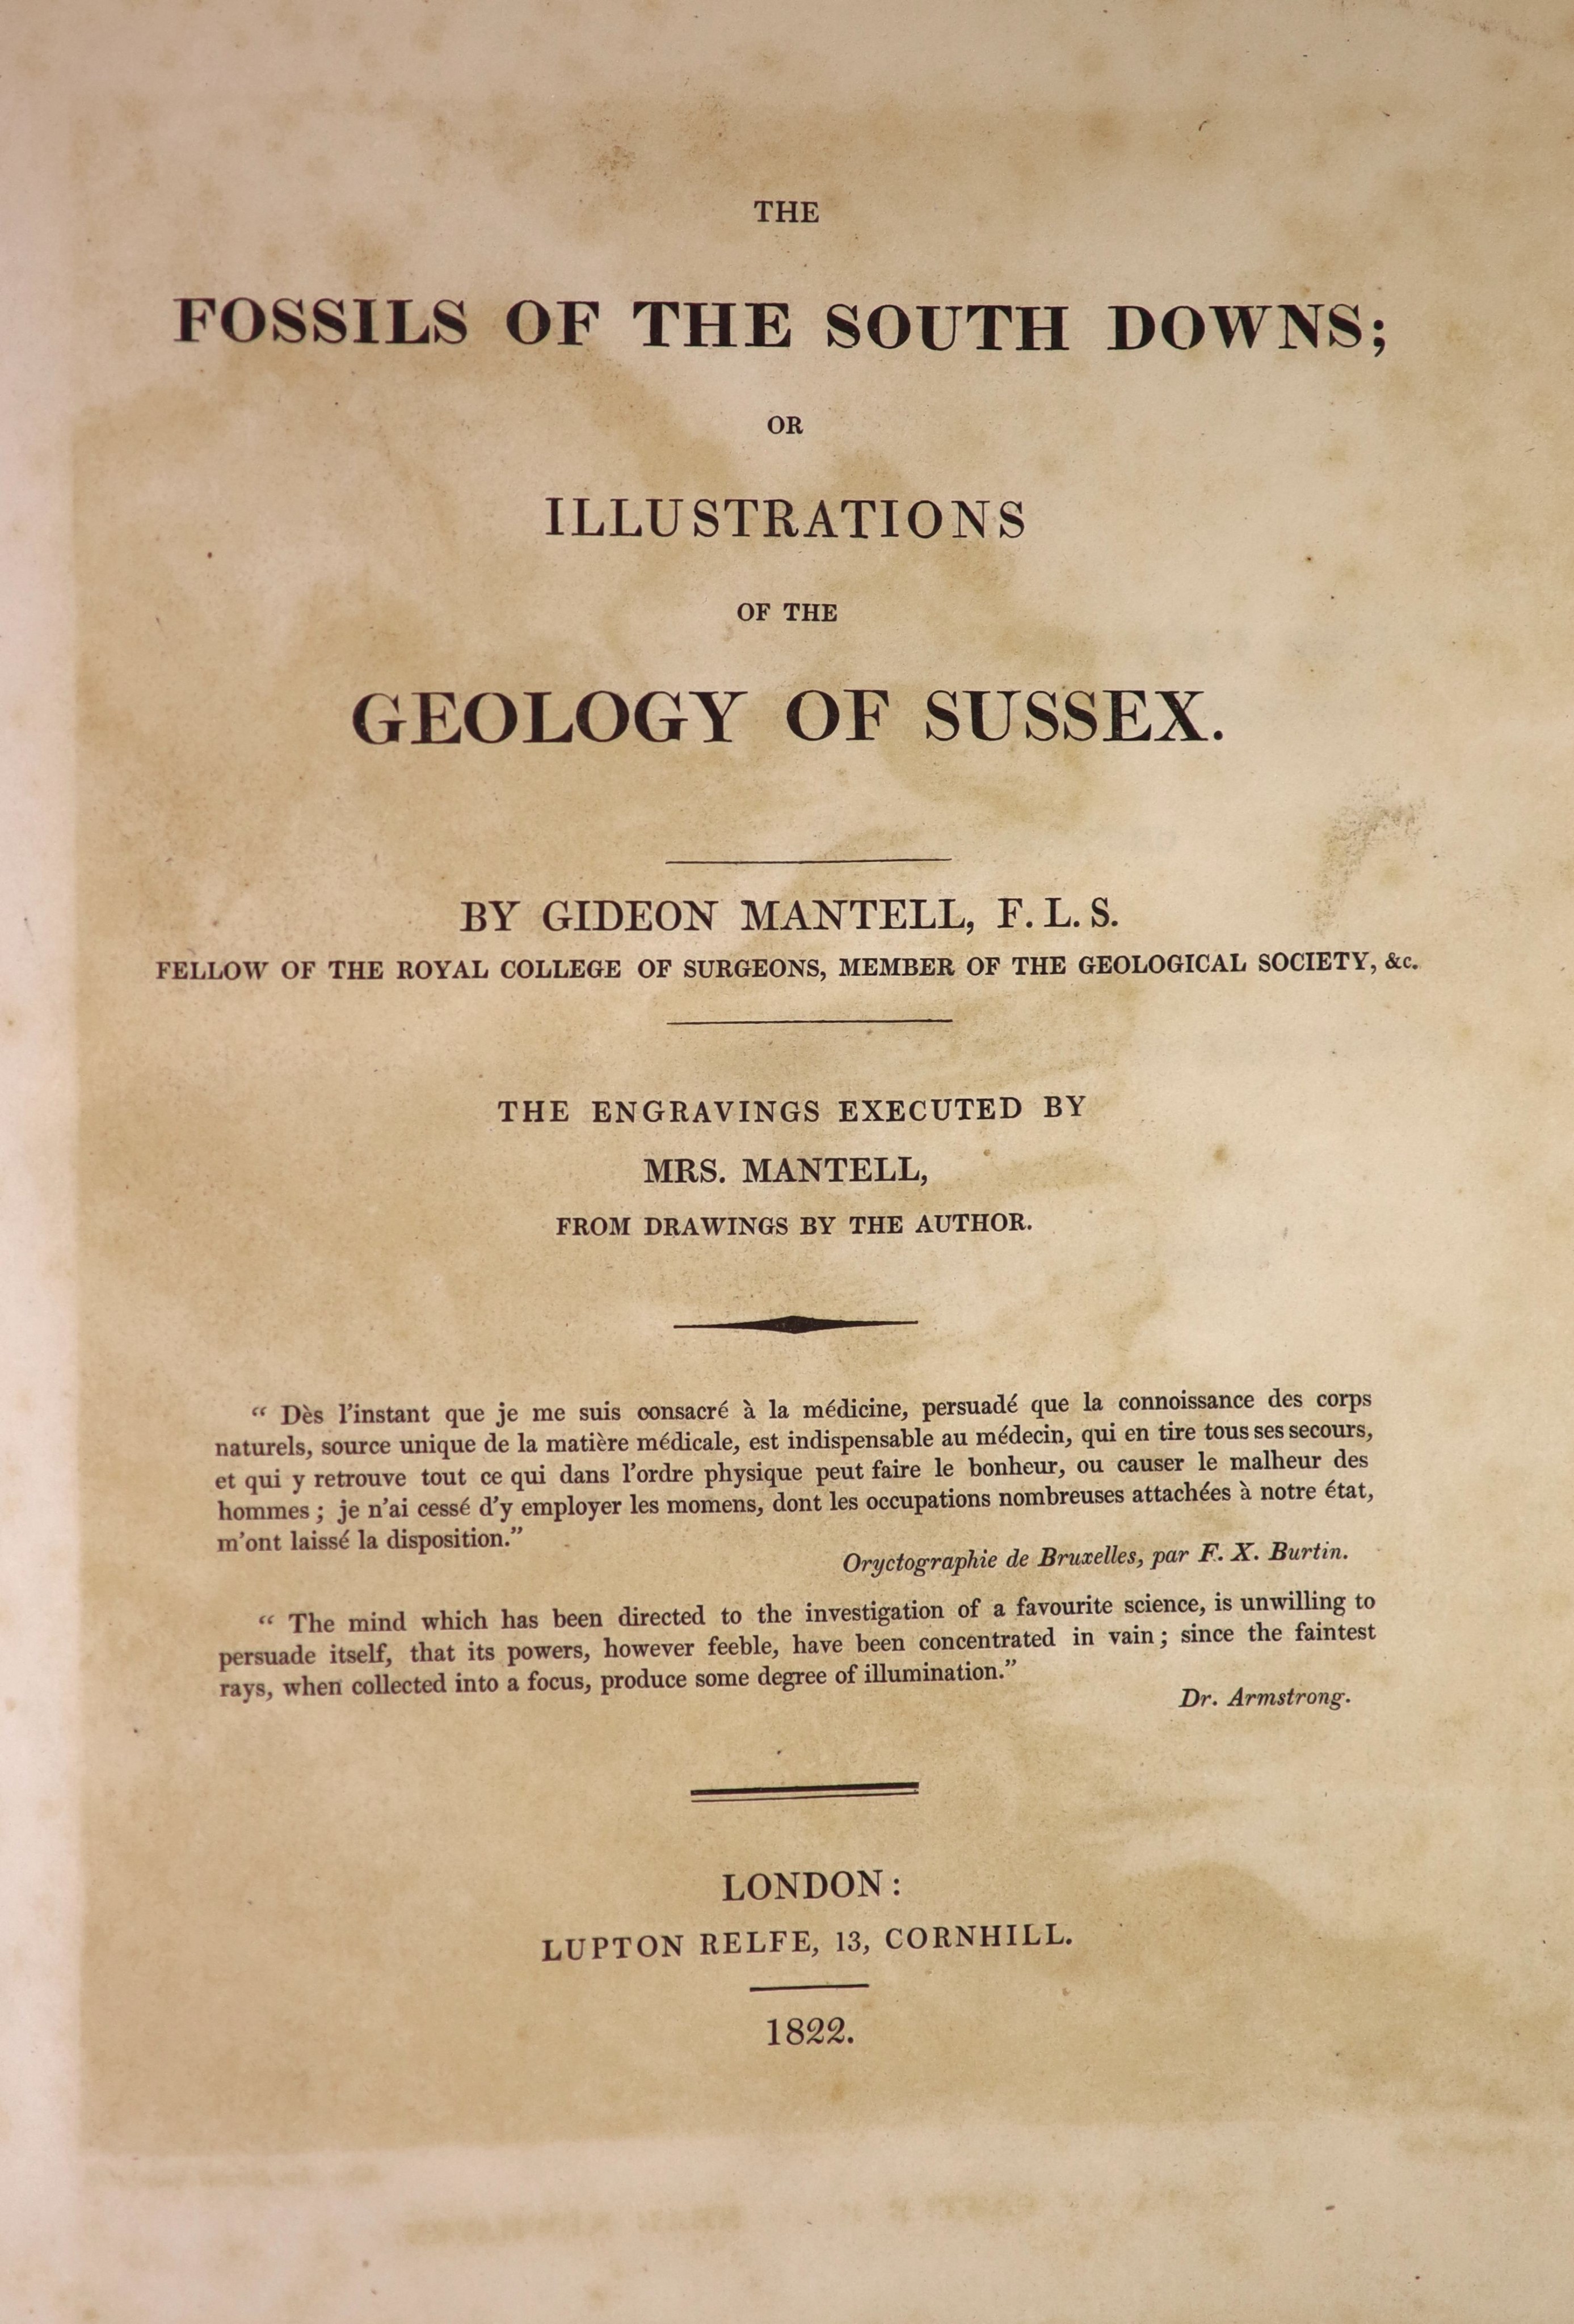 Mantell, Gideon - The Fossils of the South Downs; or Illustrations of the Geology of Sussex. hand-coloured map, 41 engraved plates (2 folded, 3 hand-coloured), half title, subscribers list